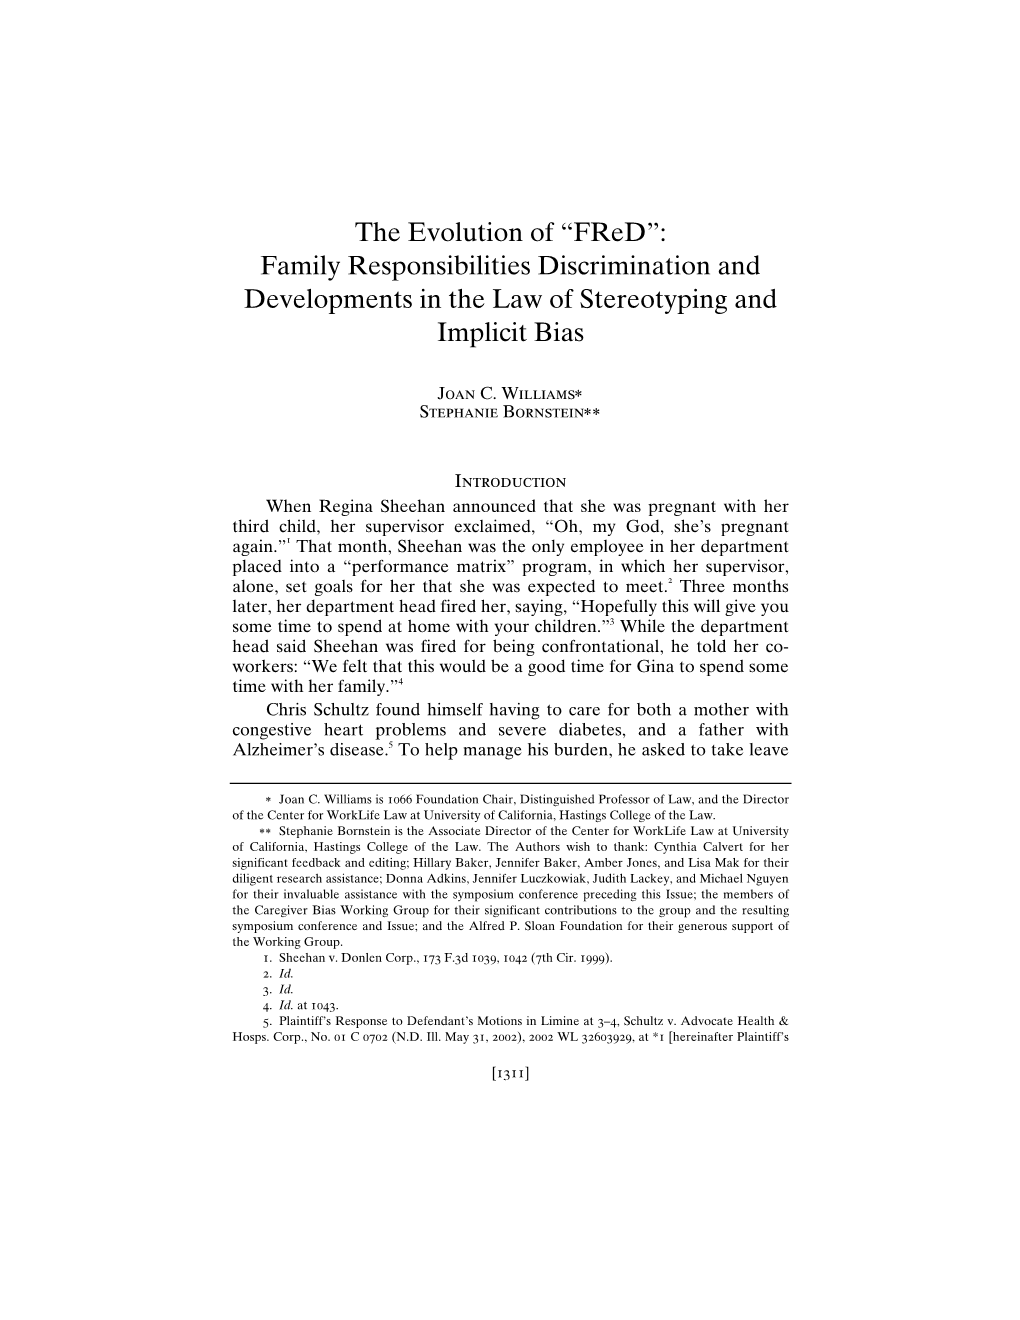 The Evolution of “Fred”: Family Responsibilities Discrimination and Developments in the Law of Stereotyping and Implicit Bias